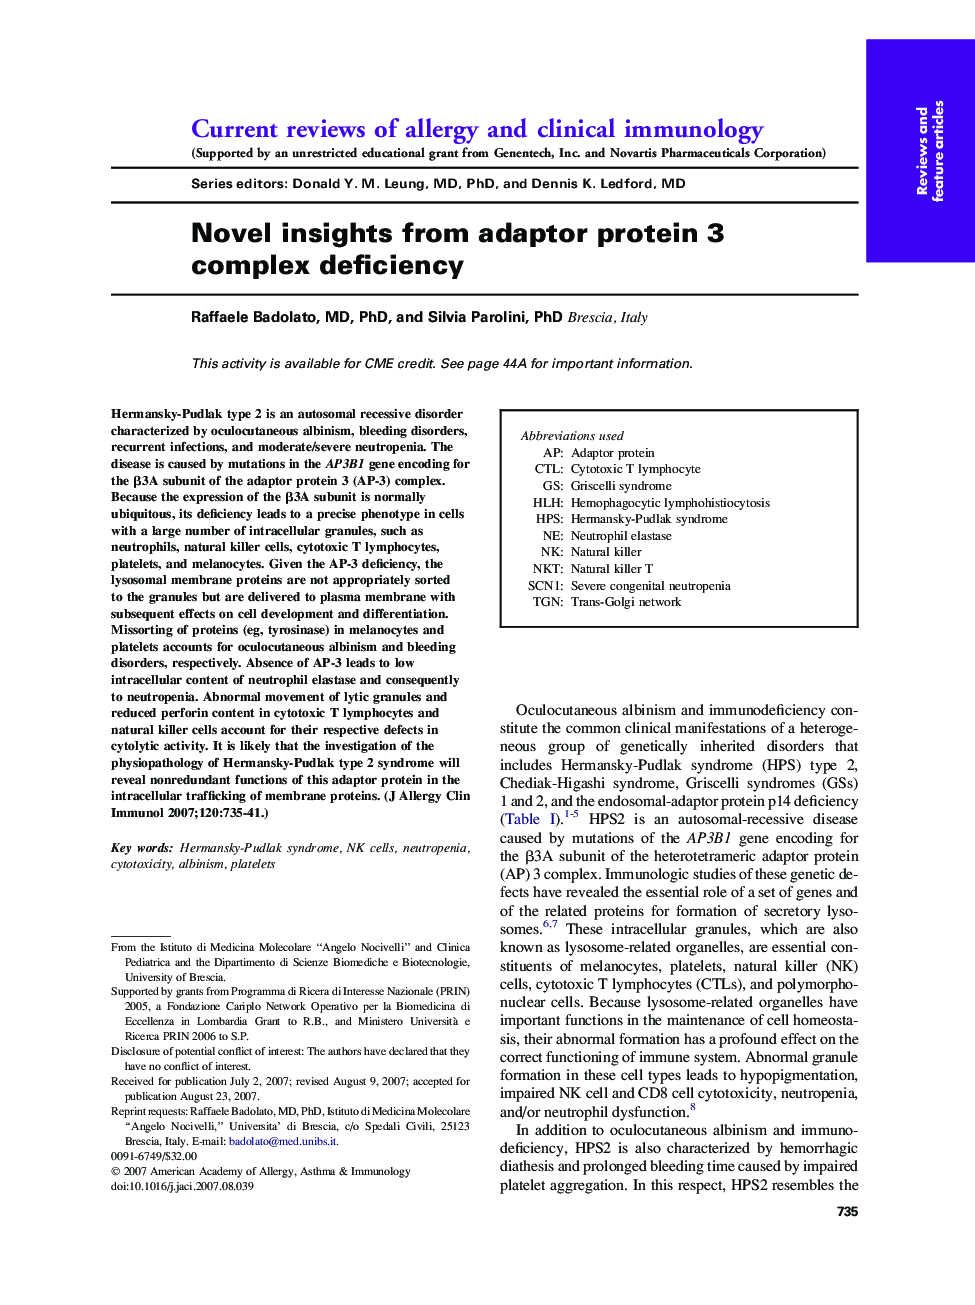 Novel insights from adaptor protein 3 complex deficiency 